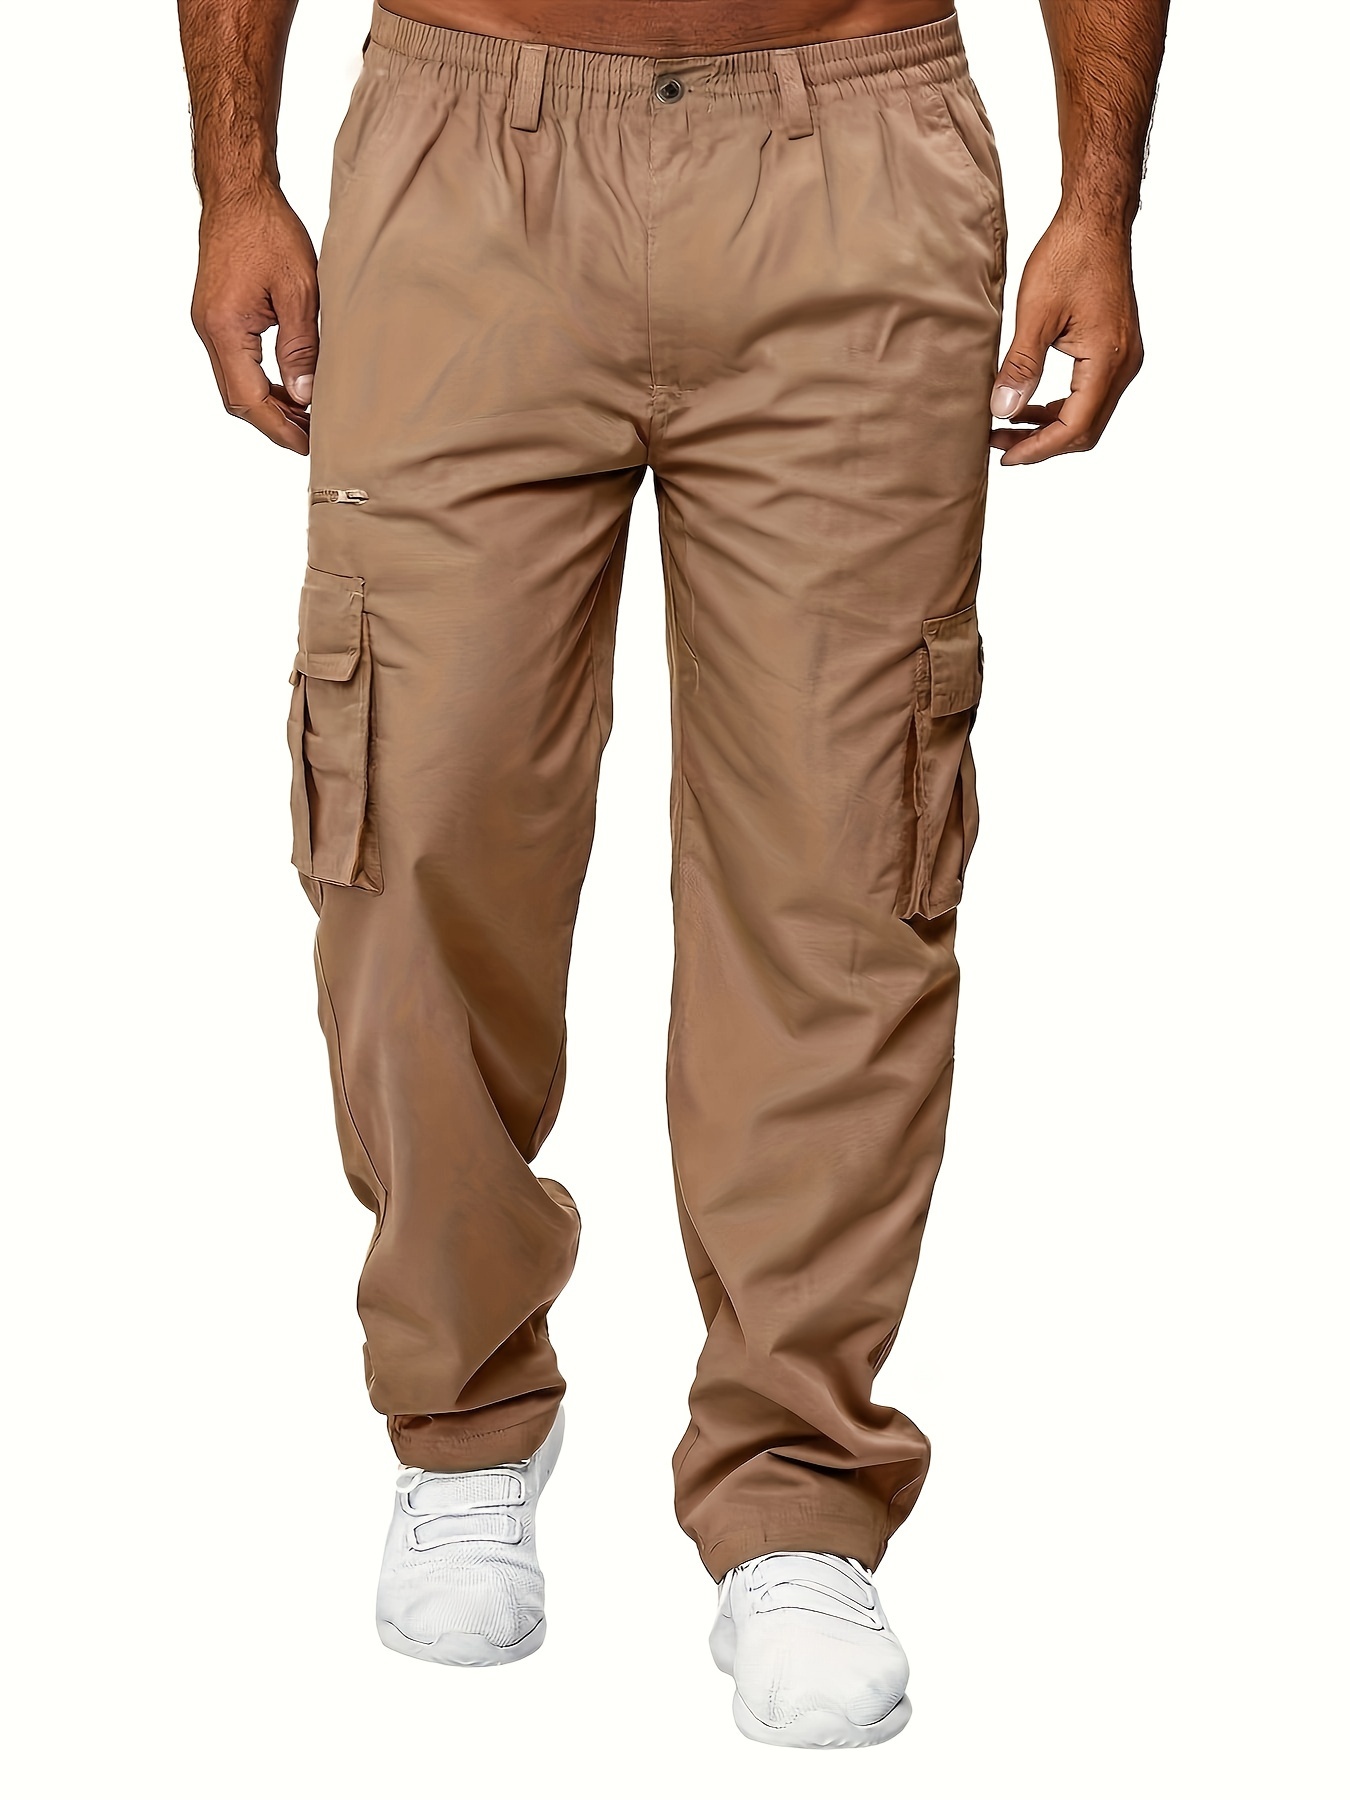 Plus Size Pants for Women Women's Cargo Pants Trousers Work Wear Solid  Combat With 6 Pocket Full Pants Clearance Khaki L